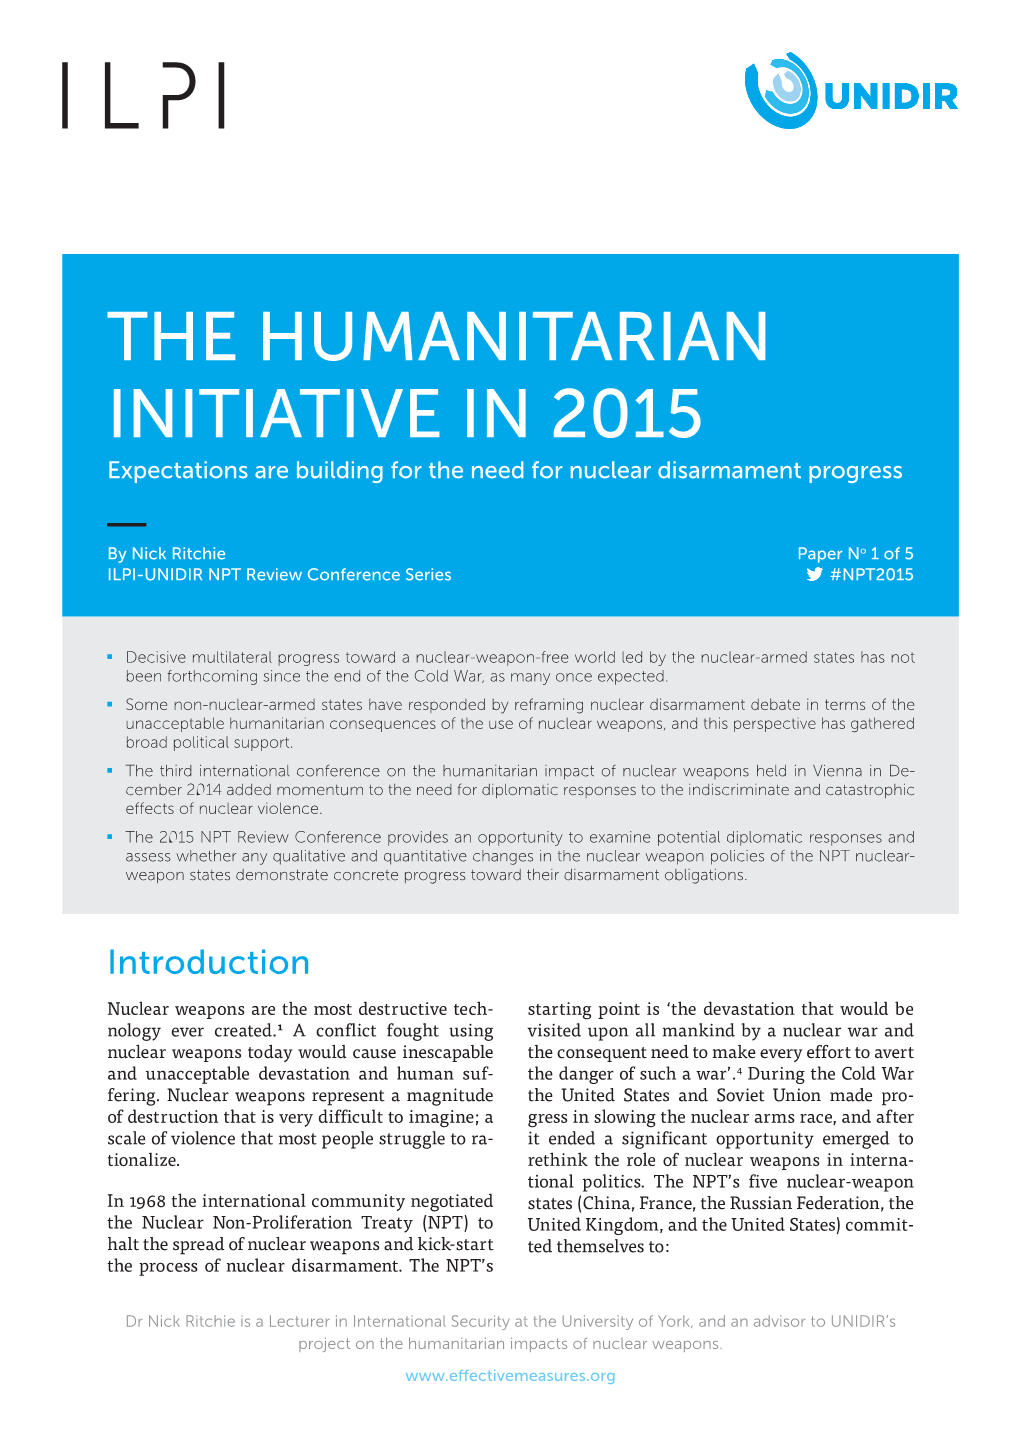 THE HUMANITARIAN INITIATIVE in 2015 Expectations Are Building for the Need for Nuclear Disarmament Progress